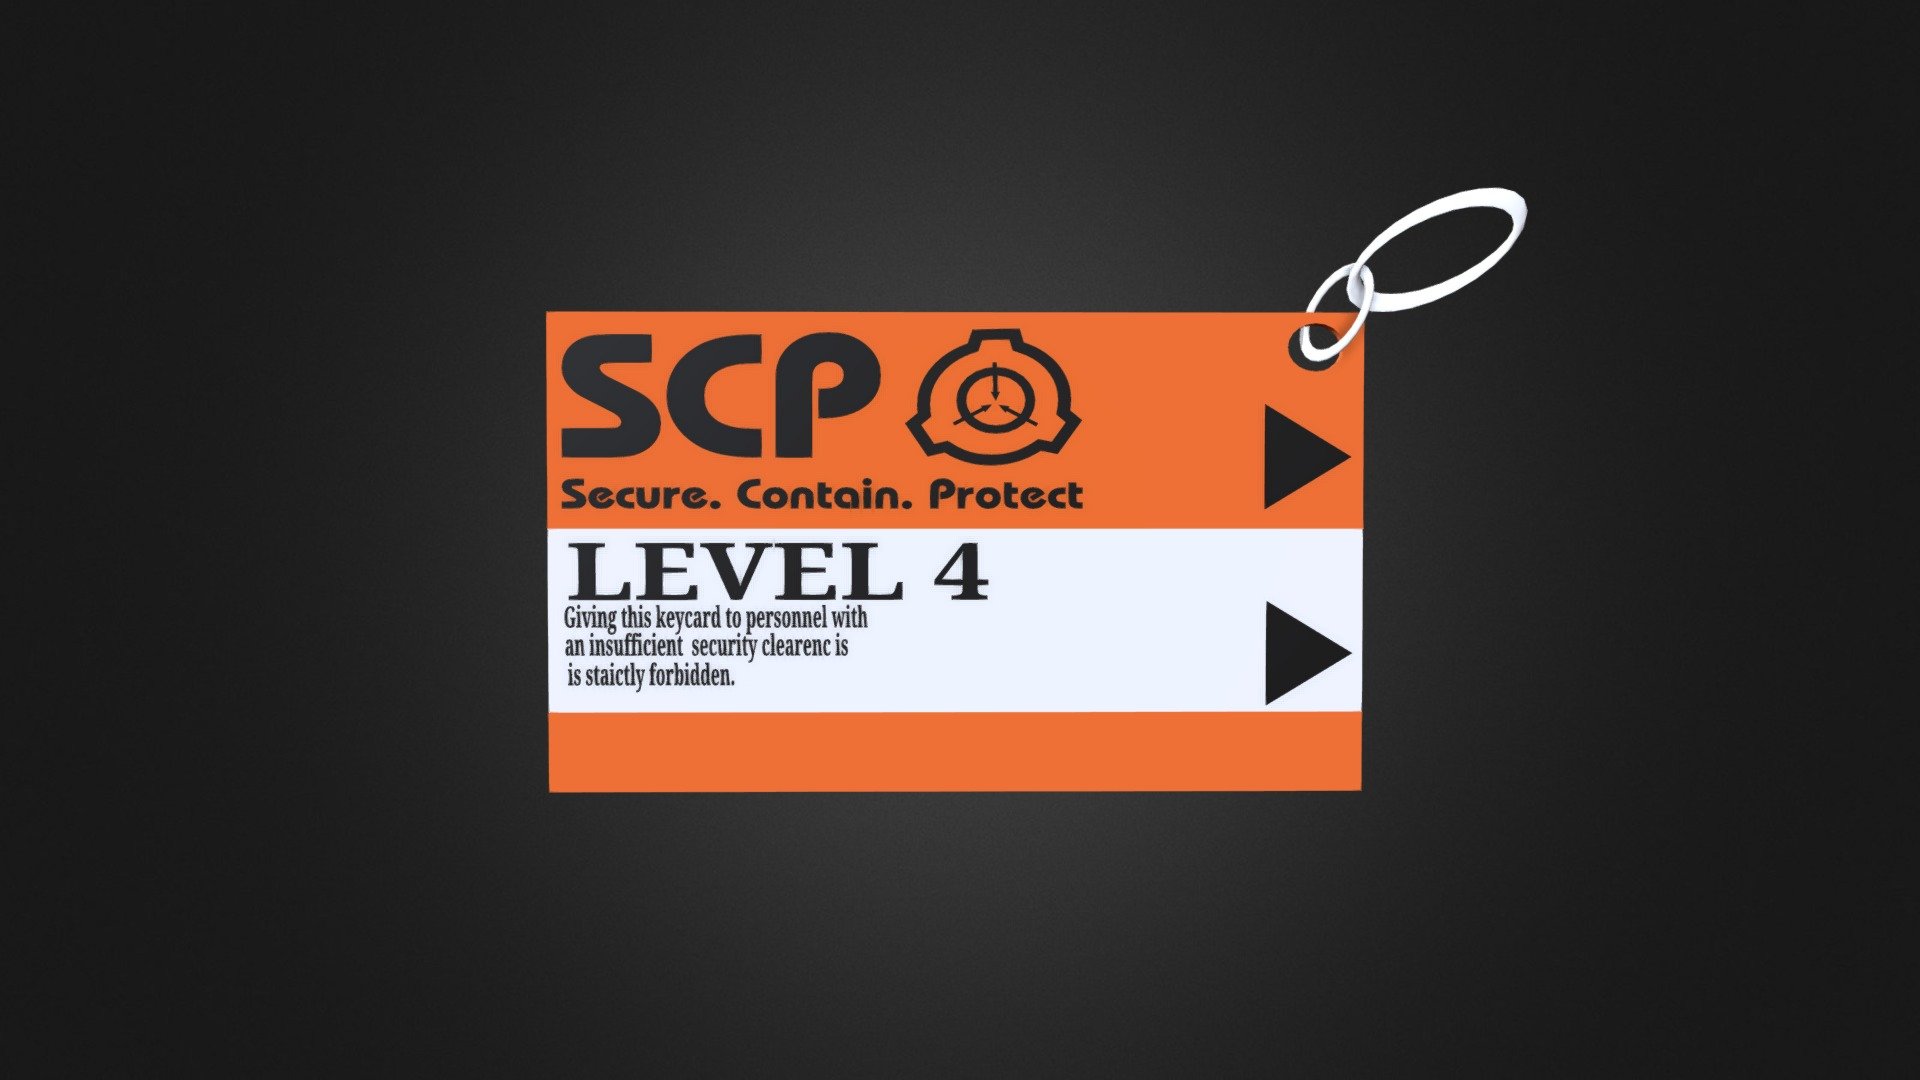 SCP - Secure Contain Protect Flashcards